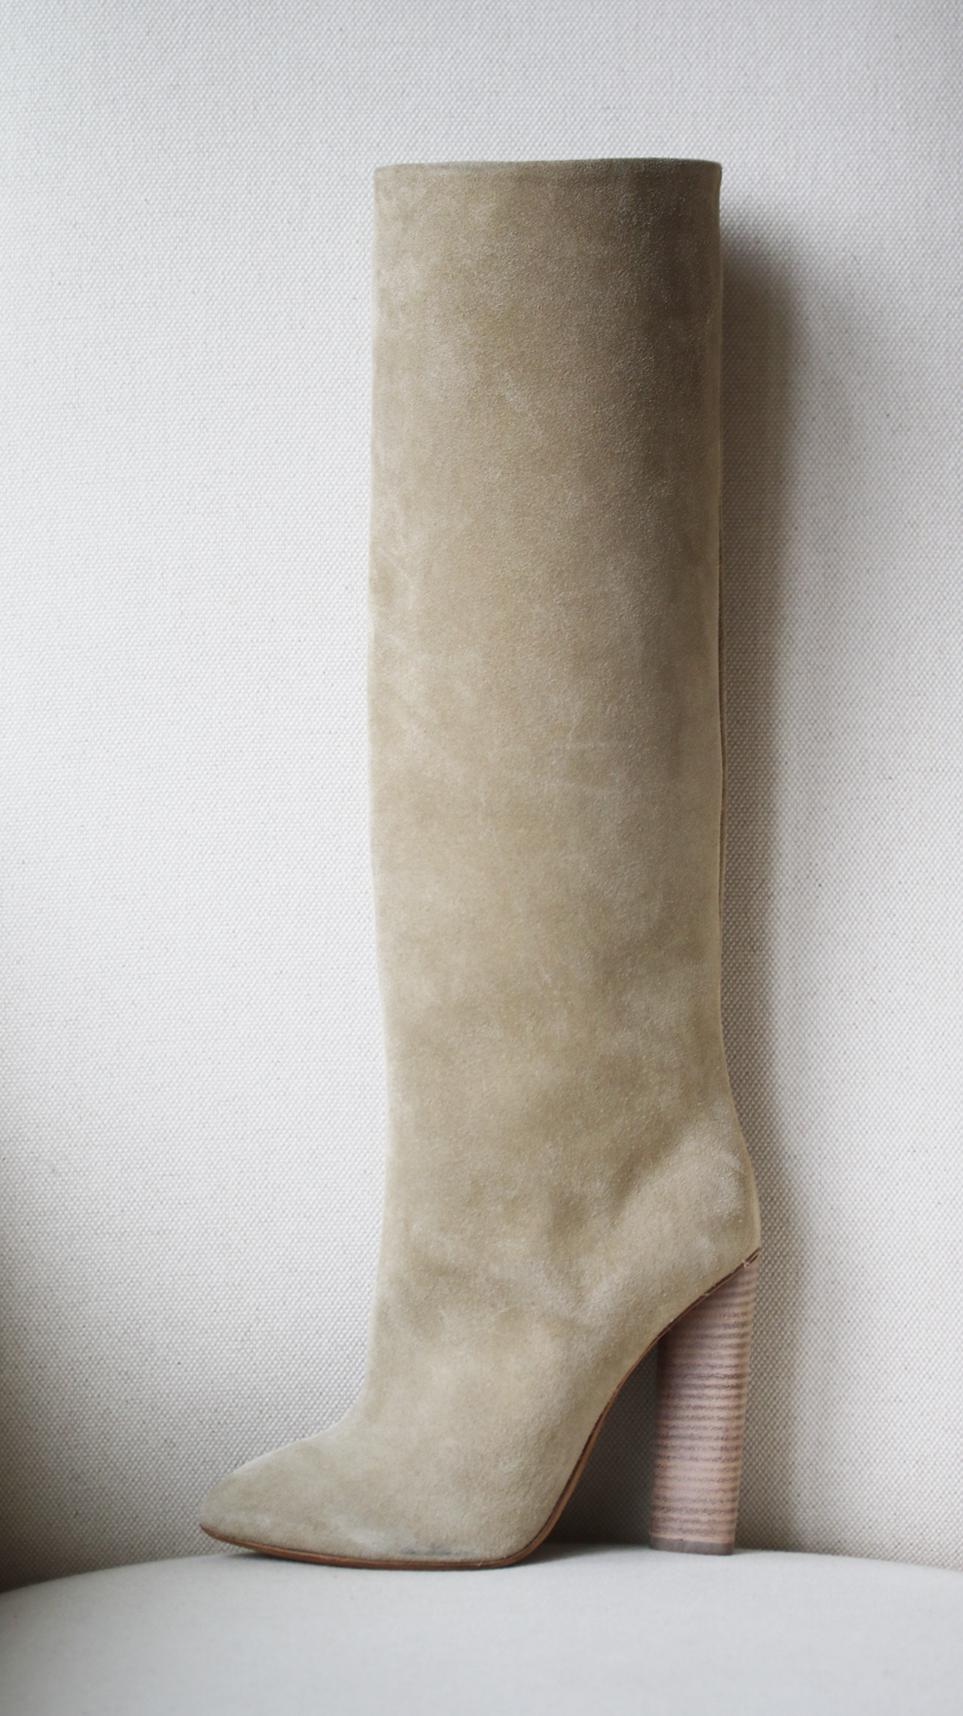 Beige suede tubular knee-high boots by Yeezy. Part of season 3. Pointed toe.  Stacked wooden heels. 100% Suede. Colour: beige.  Heel measures approx. 4.5 inches. Does not come with a box. 

Size: EU 38 (UK 5, US 8)

Condition: New without box. 